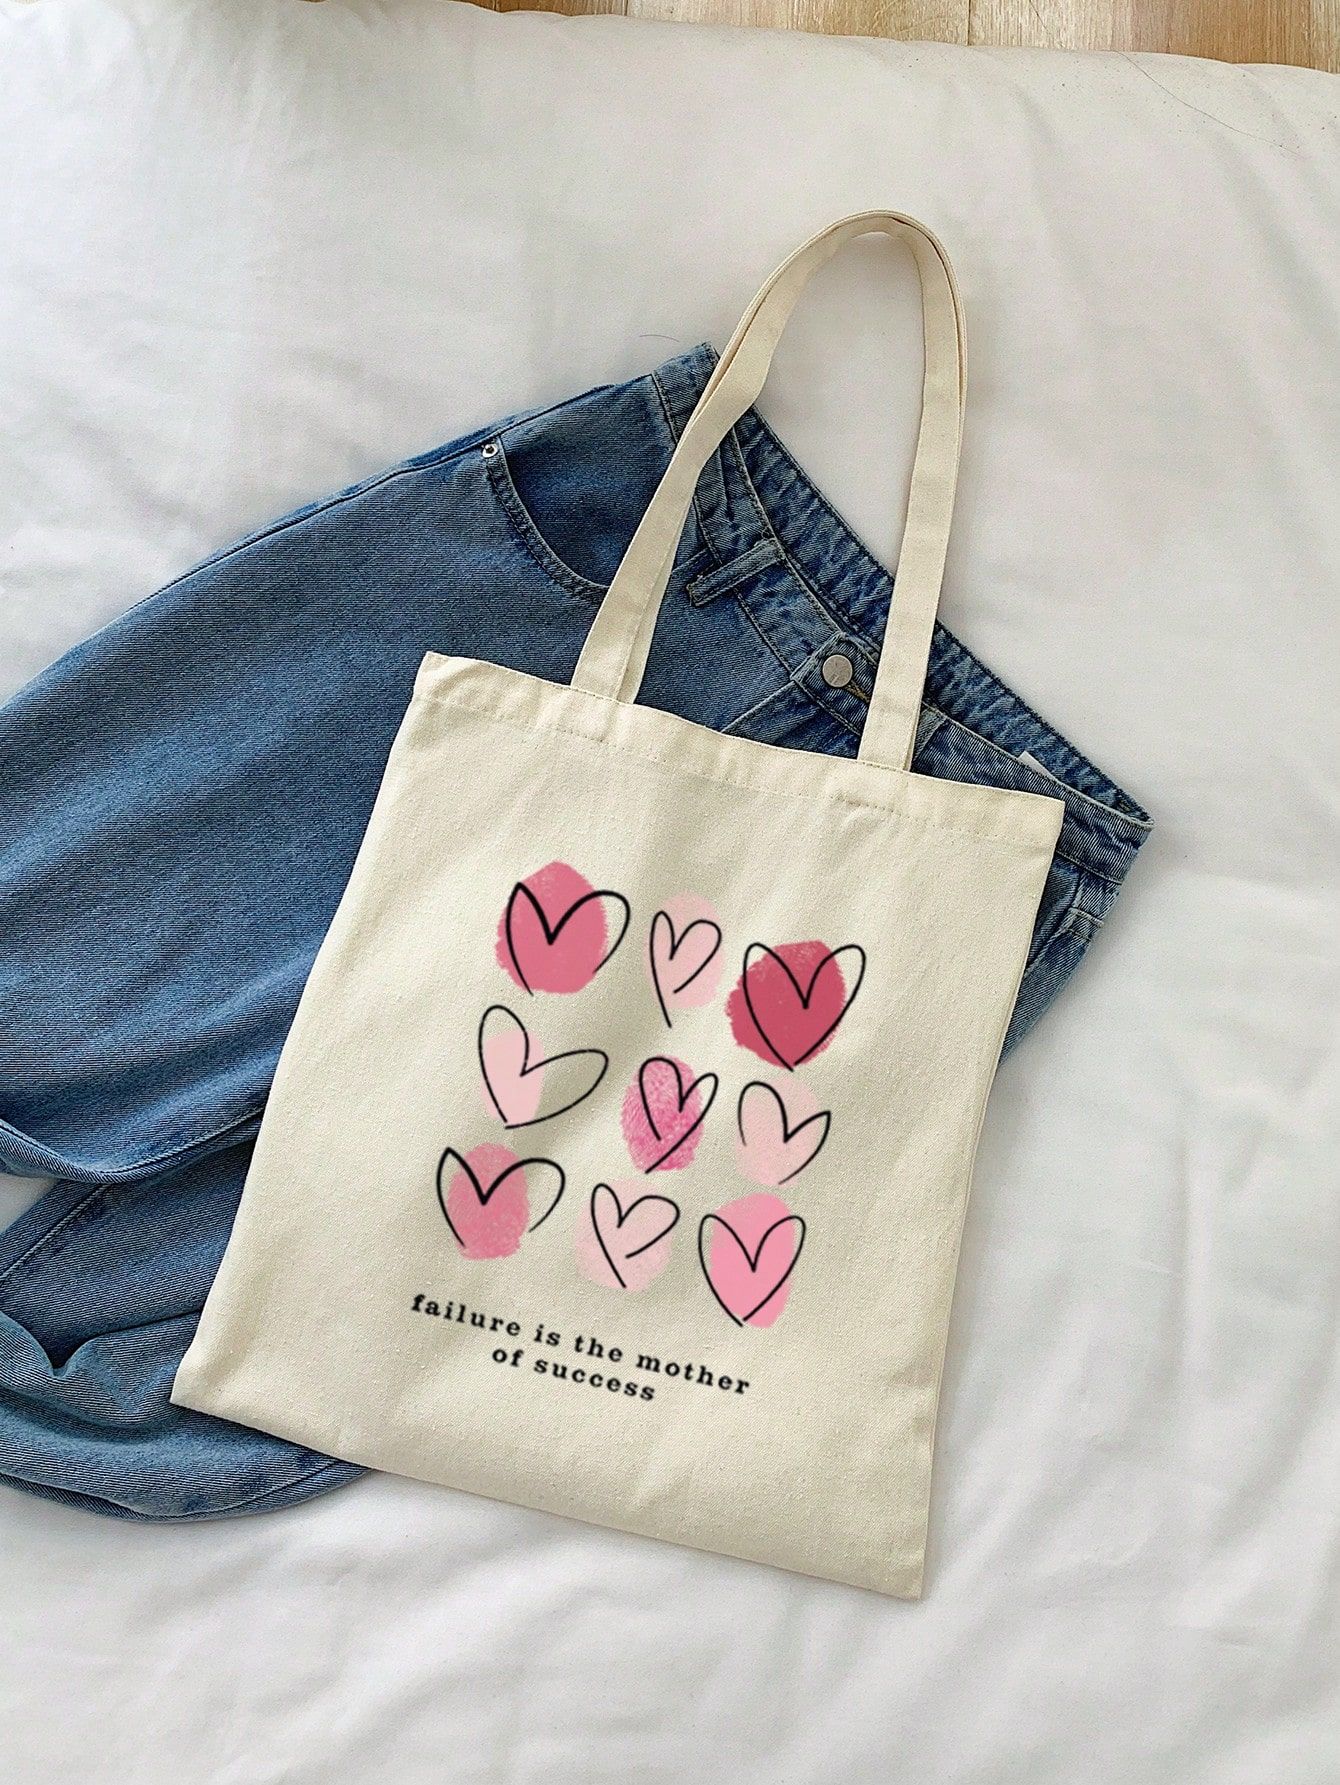 Stepping Out in Style with Tote Bags Designs: Effortlessly Chic Options